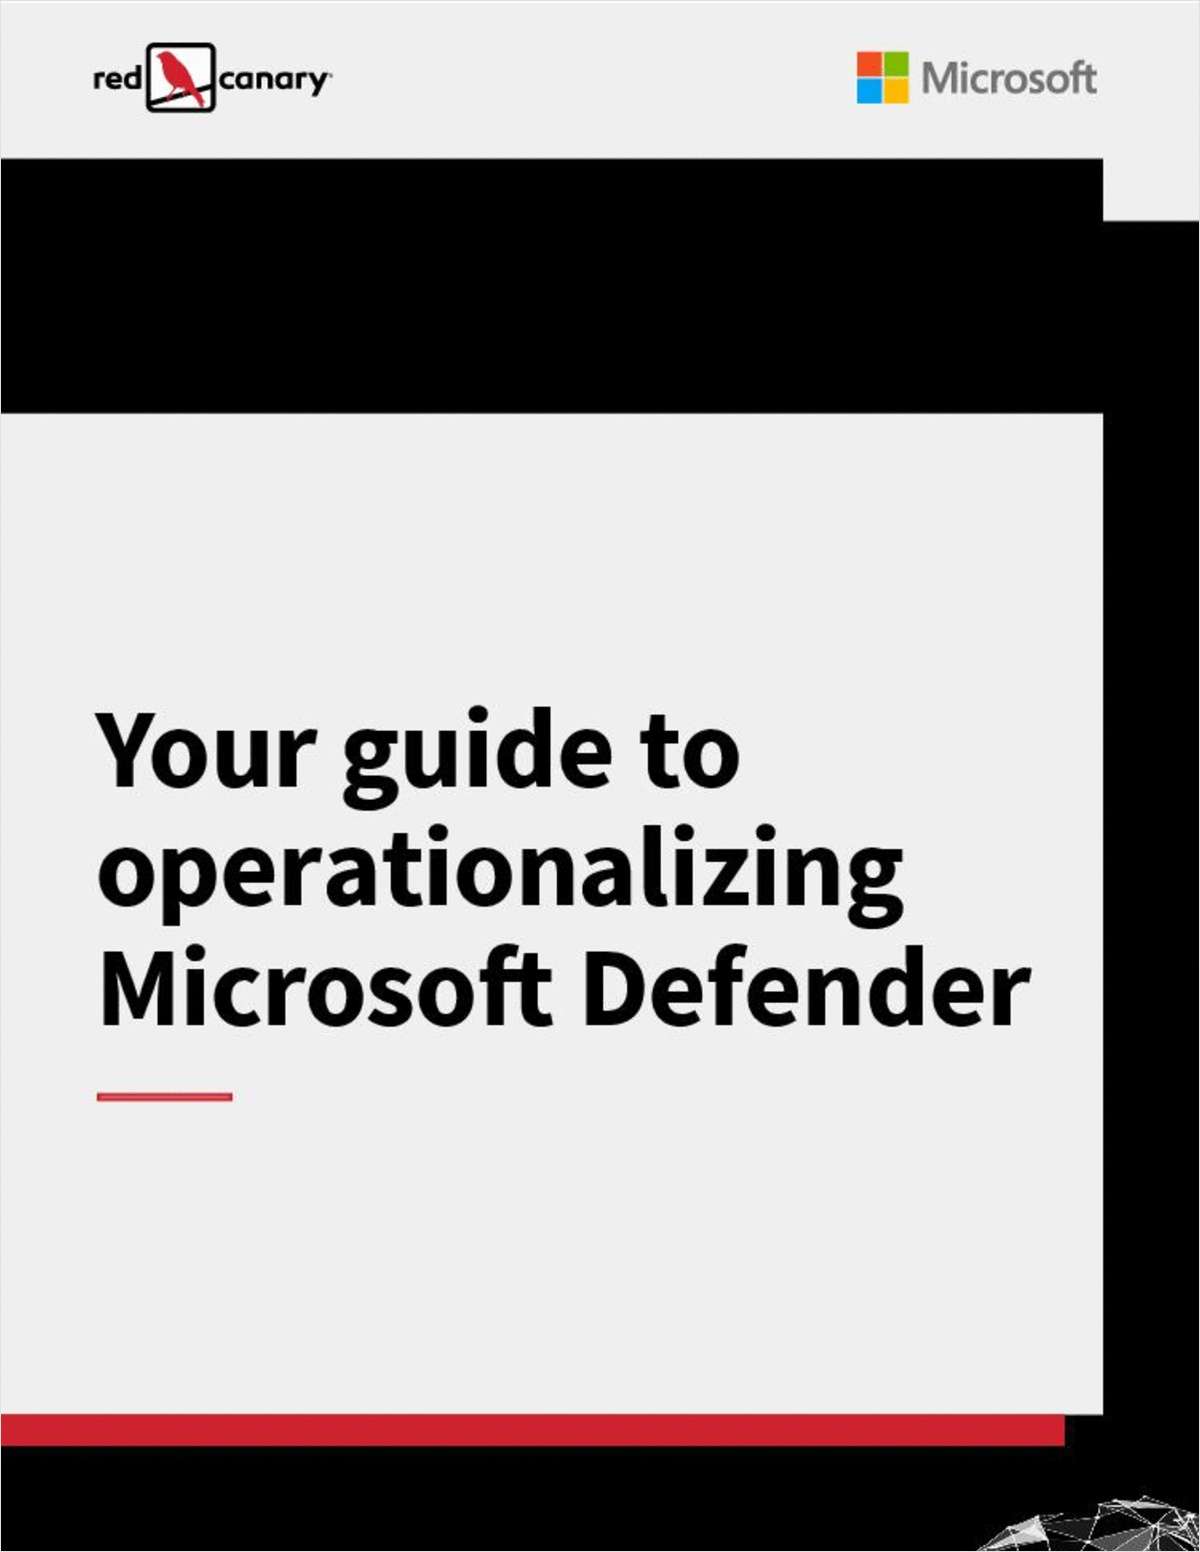 Your guide to operationalizing Microsoft Defender